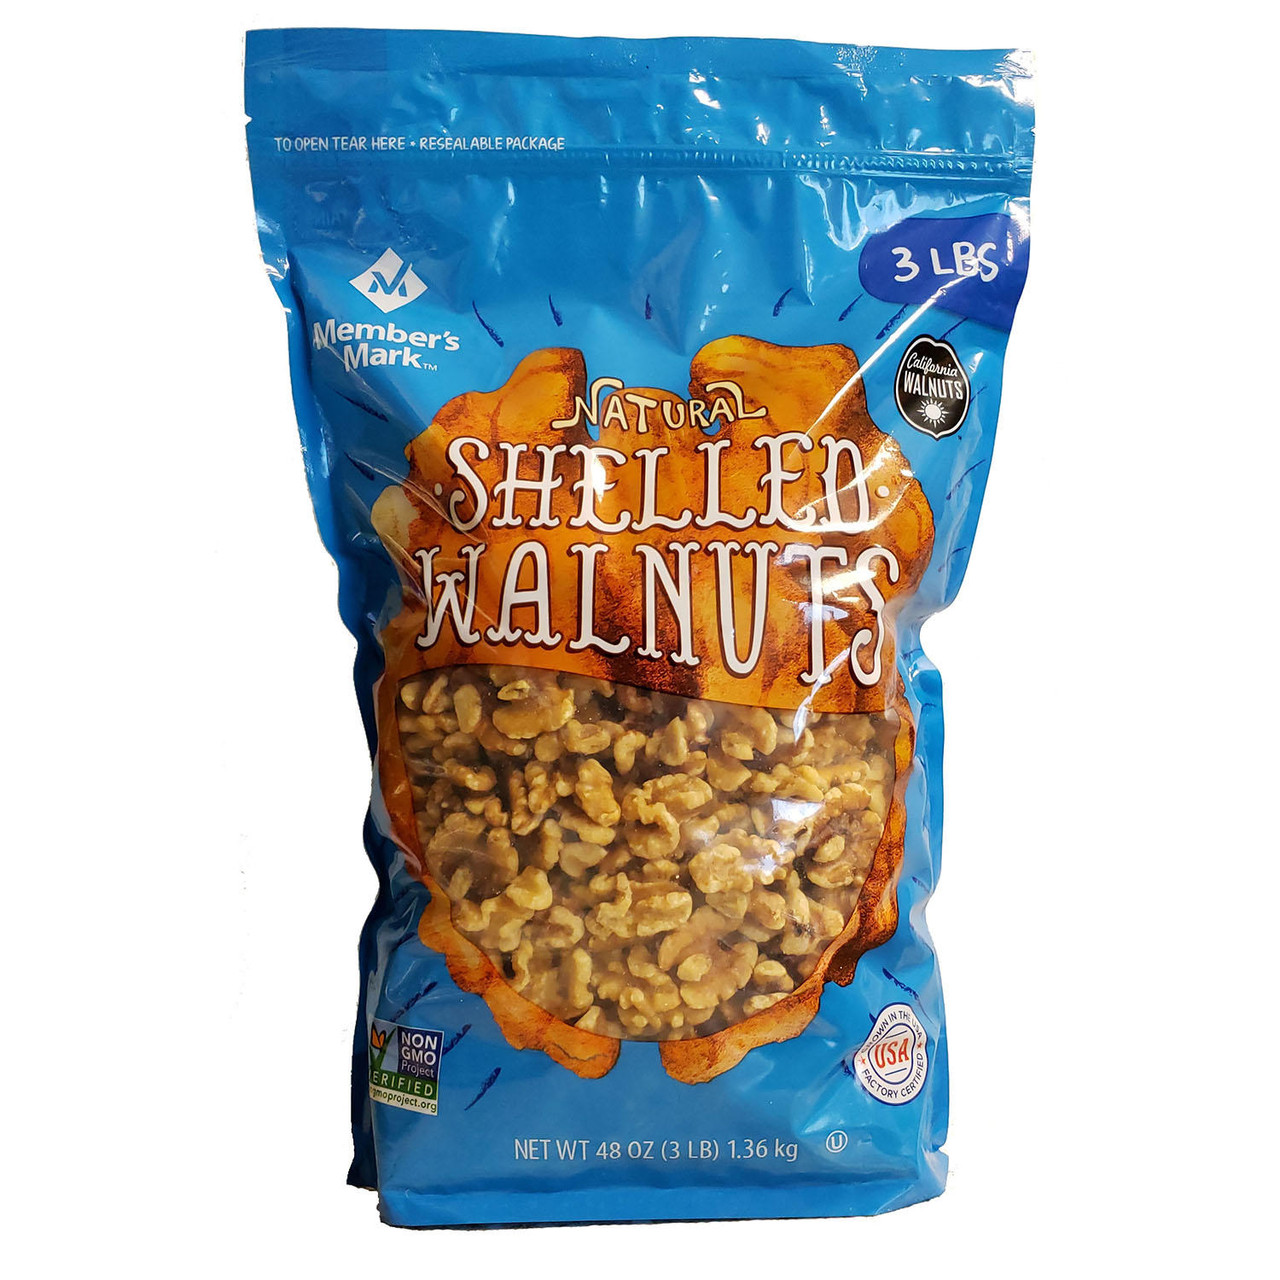 Member's Mark Natural Shelled Walnuts (3 lbs.) - [From 39.00 - Choose pk Qty ] - *Ships from Miami